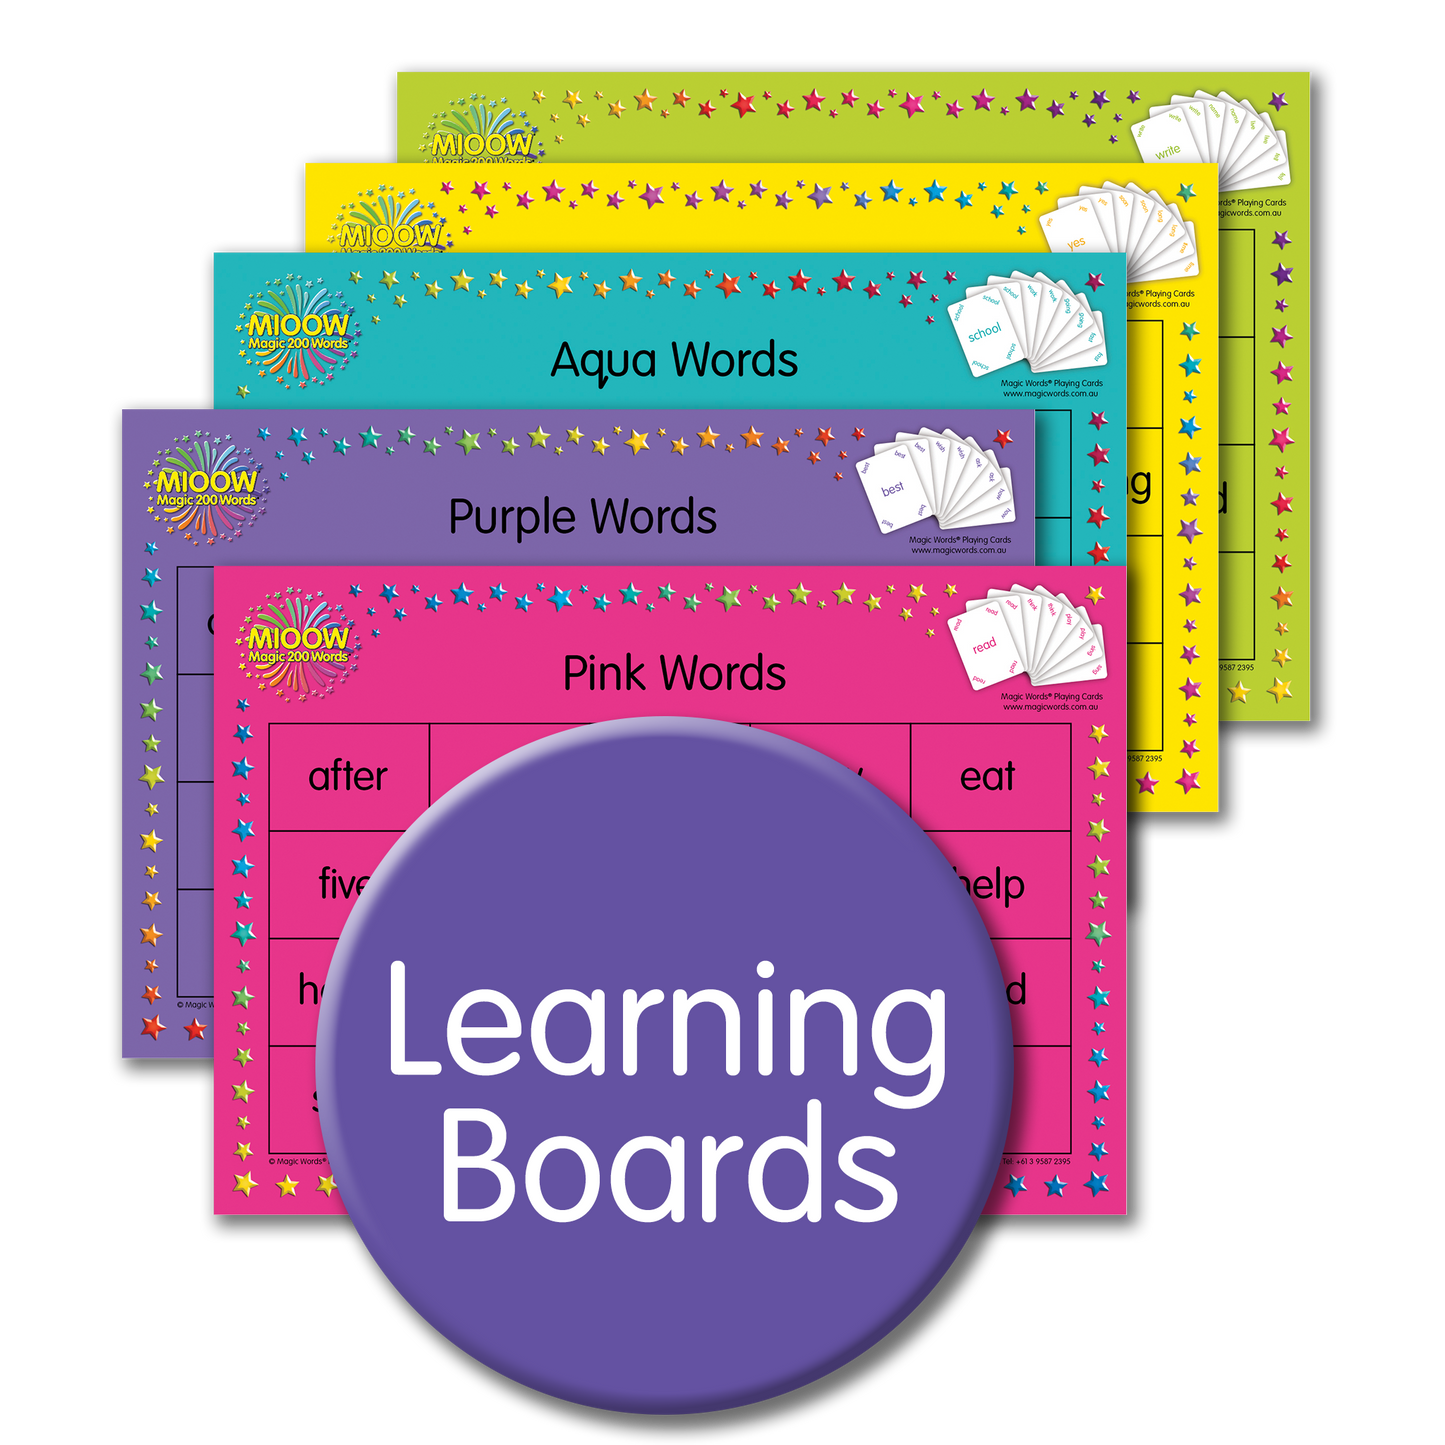 Magic Words sight words Learning Boards for learning to read the most frequently used words in reading. Magic 200 Words Learning Boards.